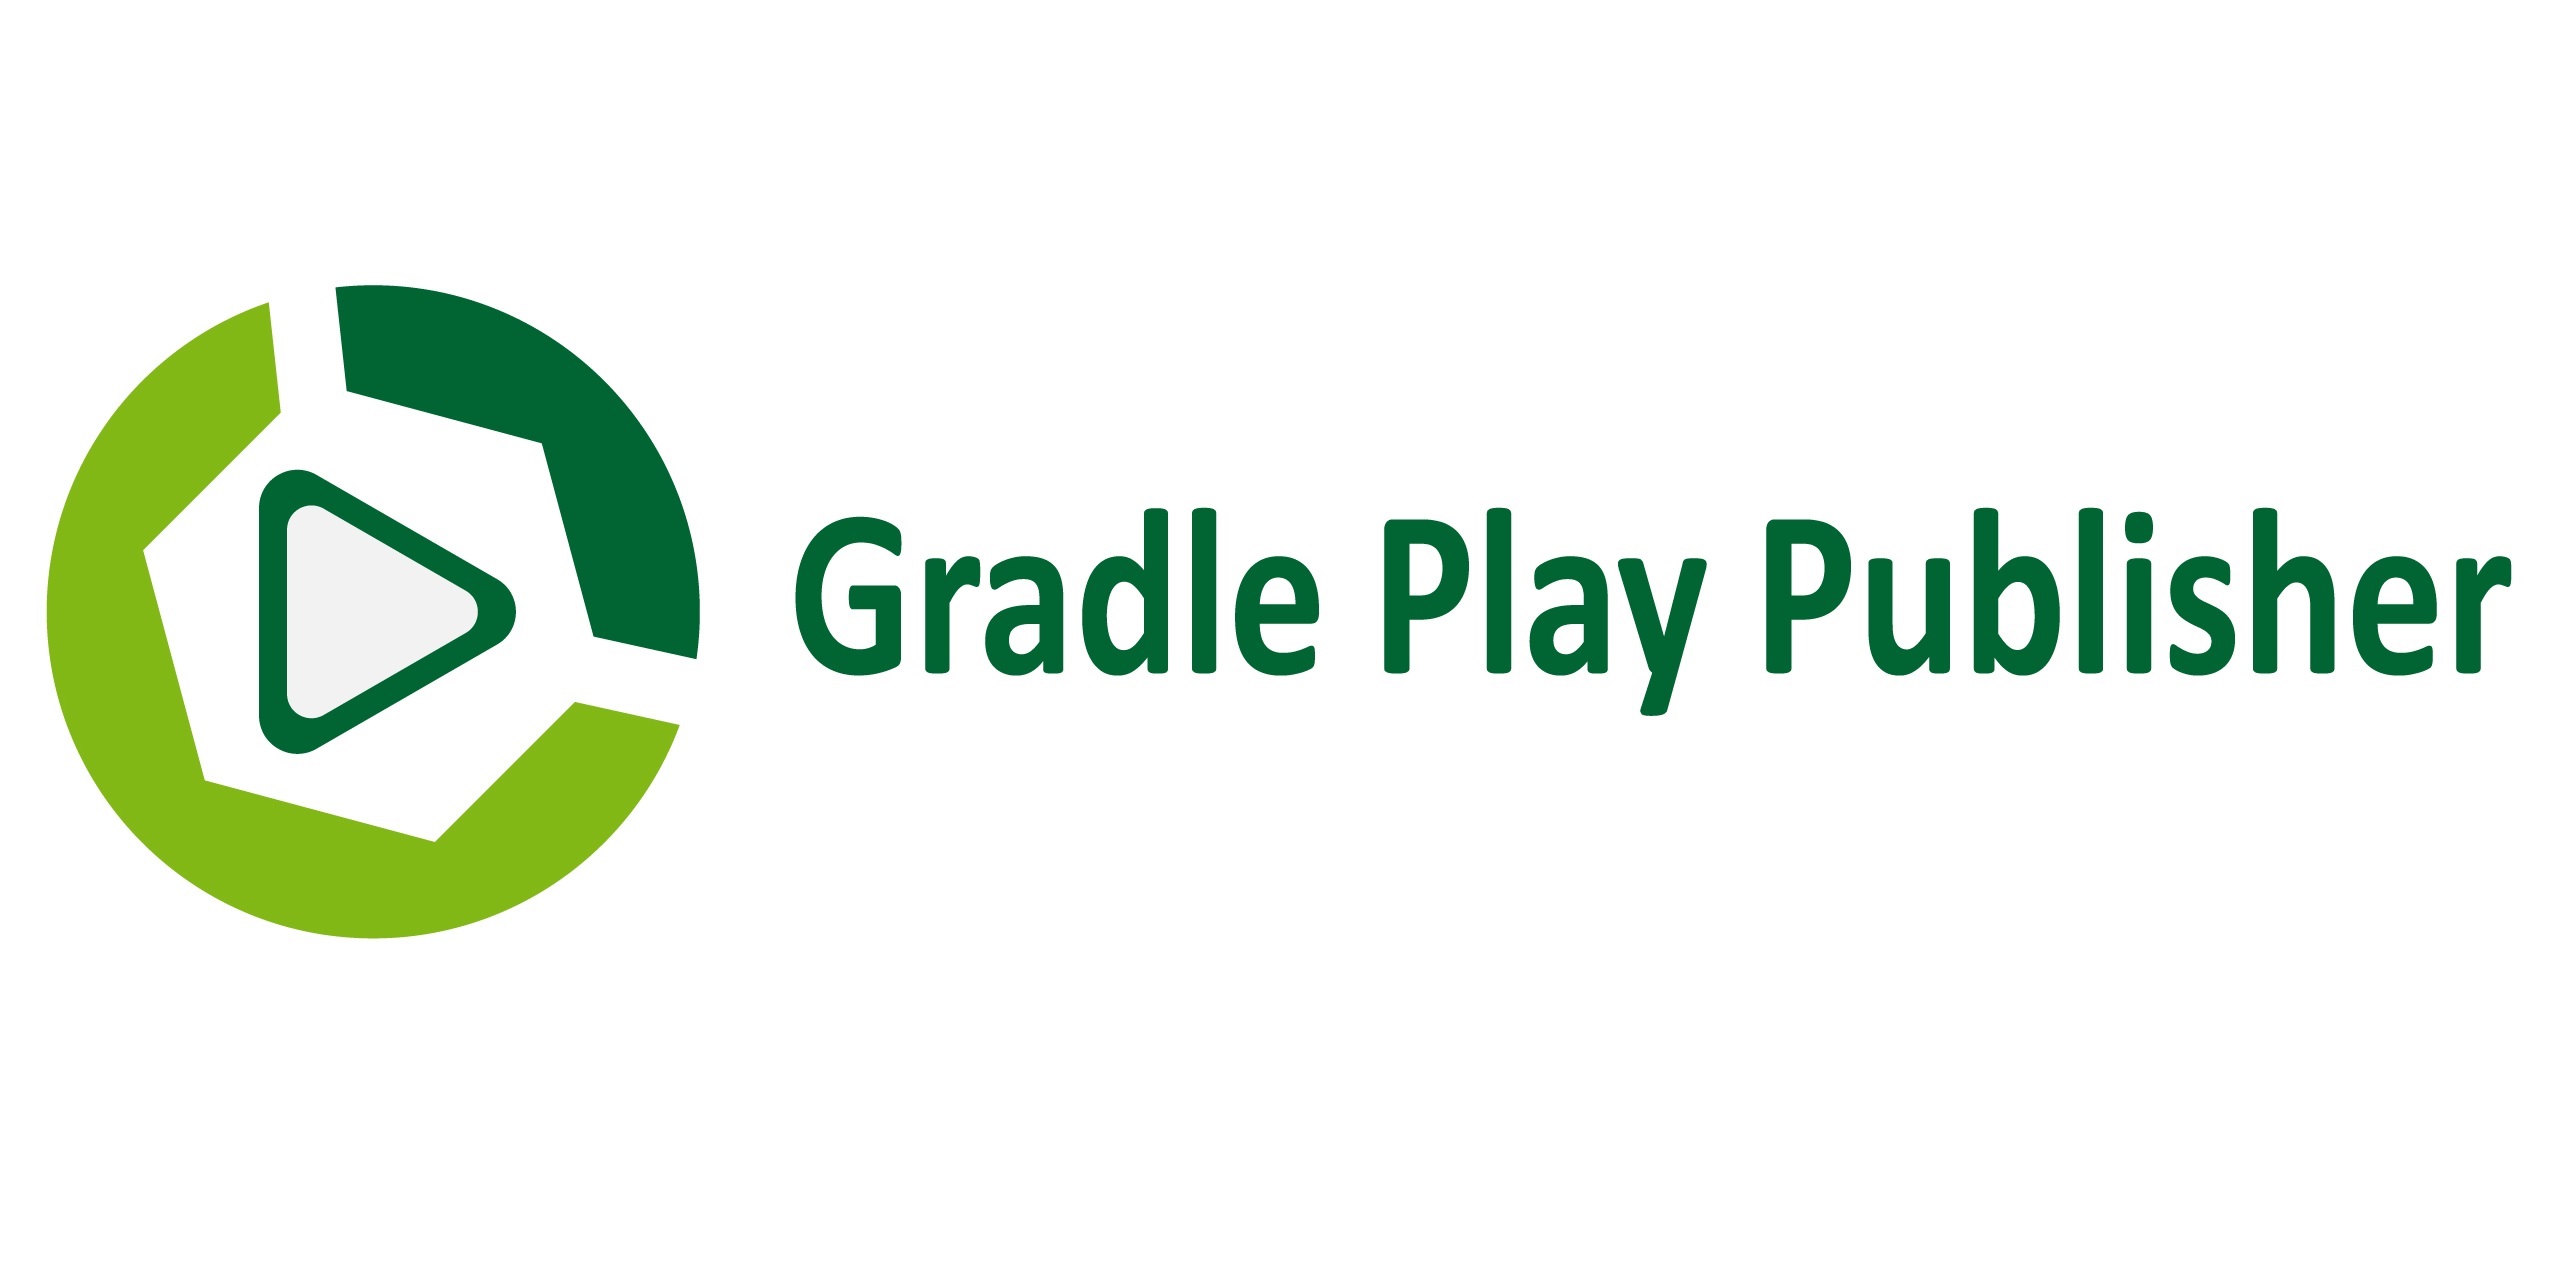 gradle-play-publisher